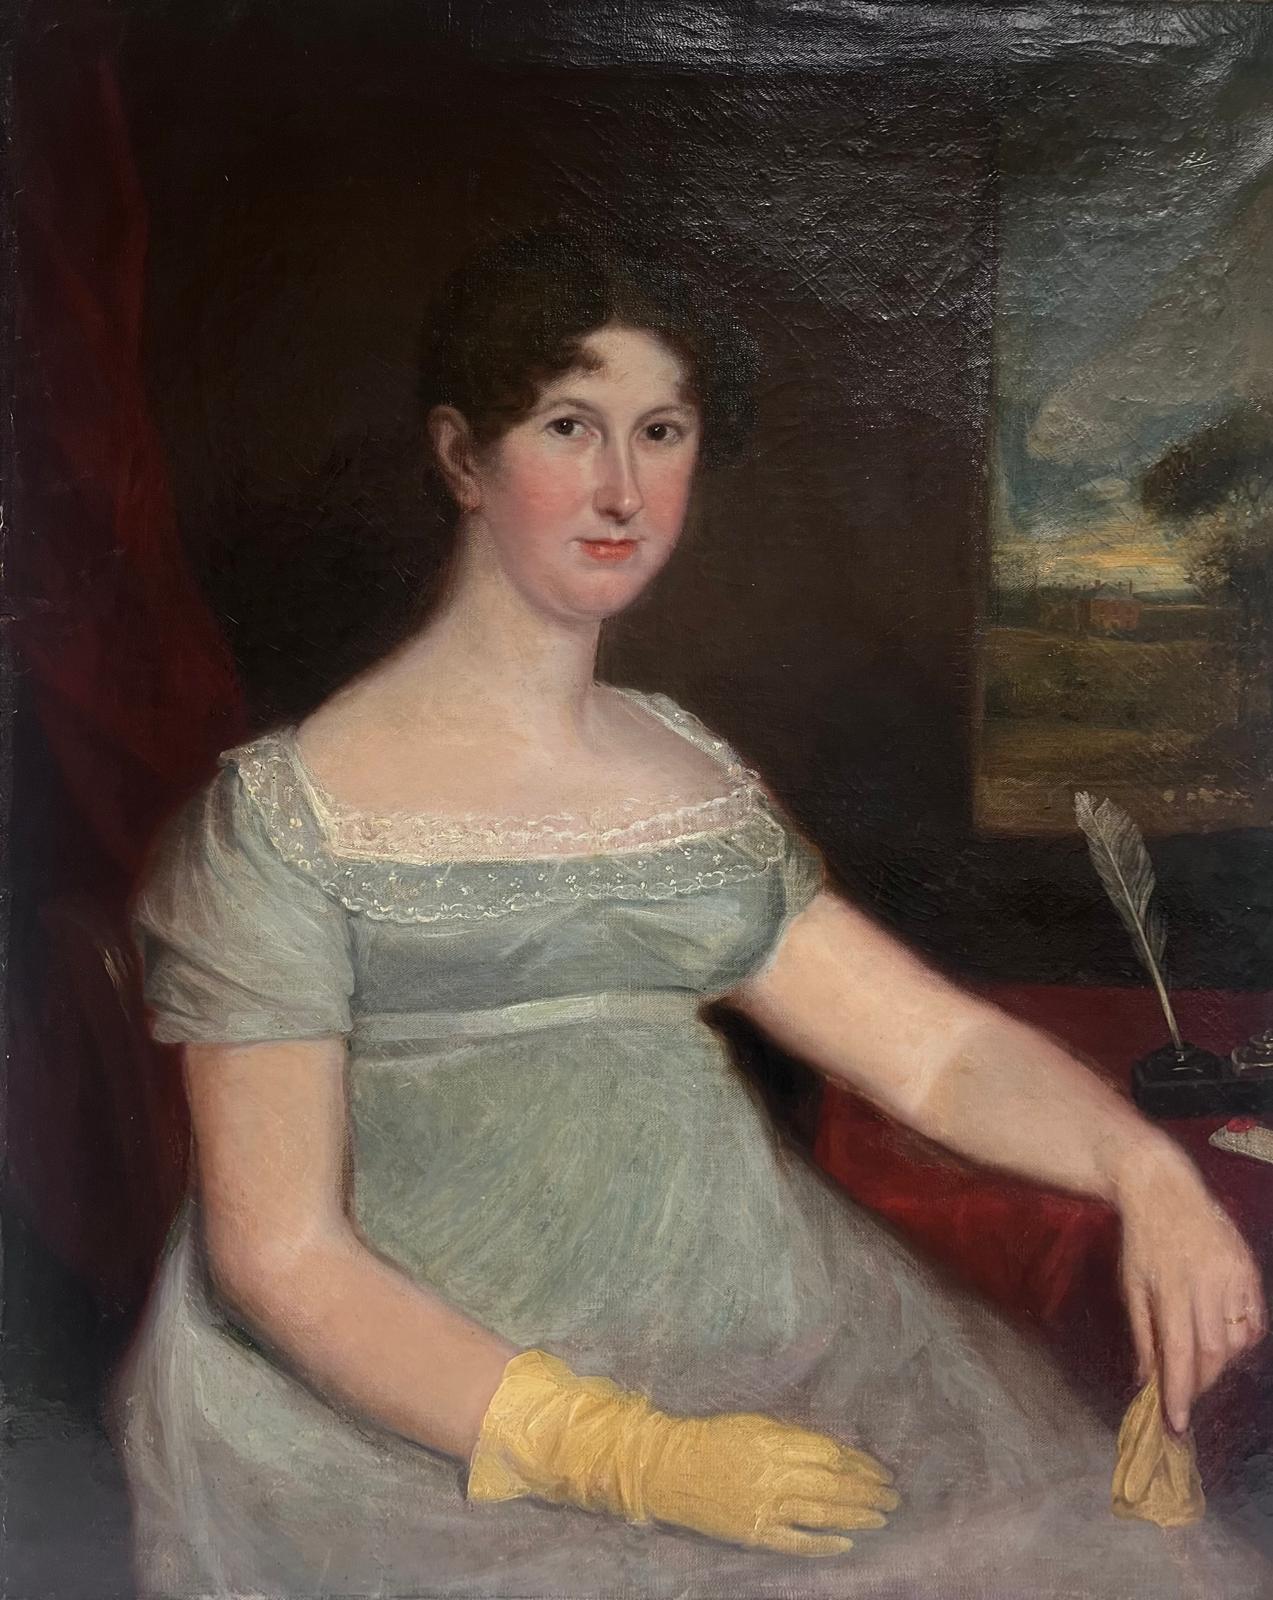 Portrait of a Country Lady, depicted Seated wearing a silk glove and with a Quill Pen
English artist, circa 1820's
oil on canvas, unframed
canvas: 35 x 29 inches
provenance: private collection, England
condition: very good and sound condition